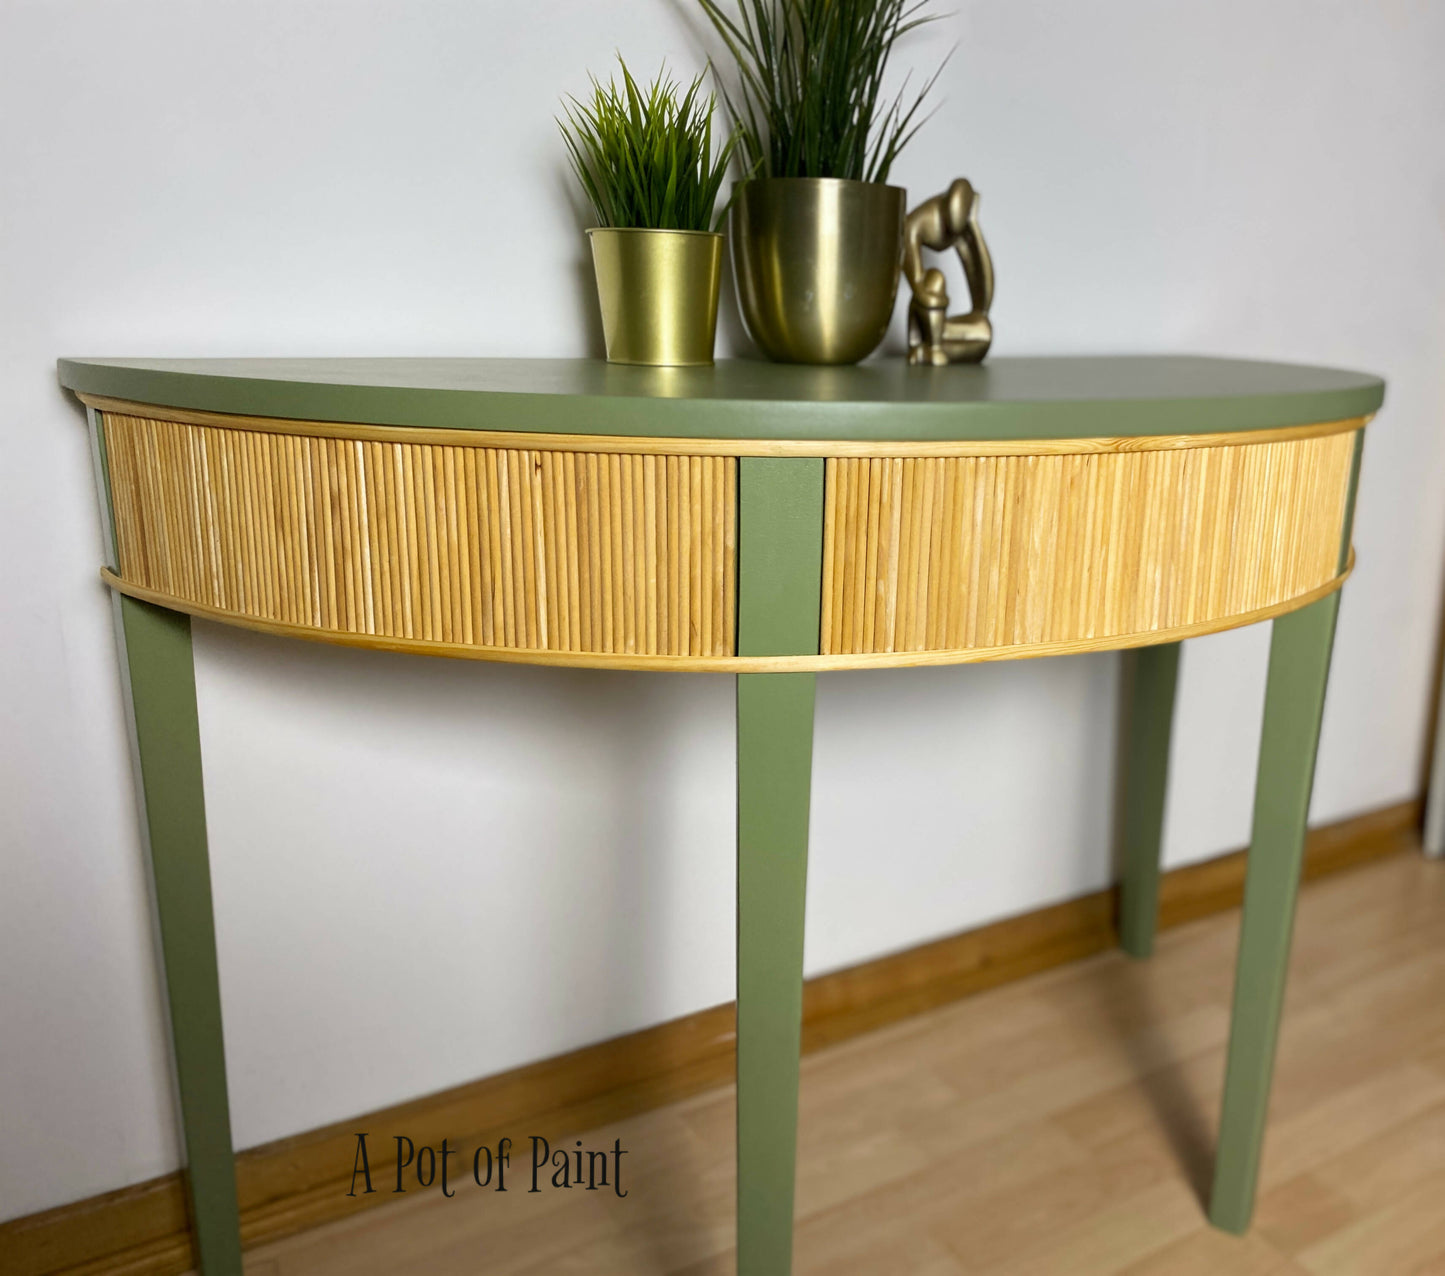 Demi Lune Vintage Half Moon Table / Console Table / Hall Table